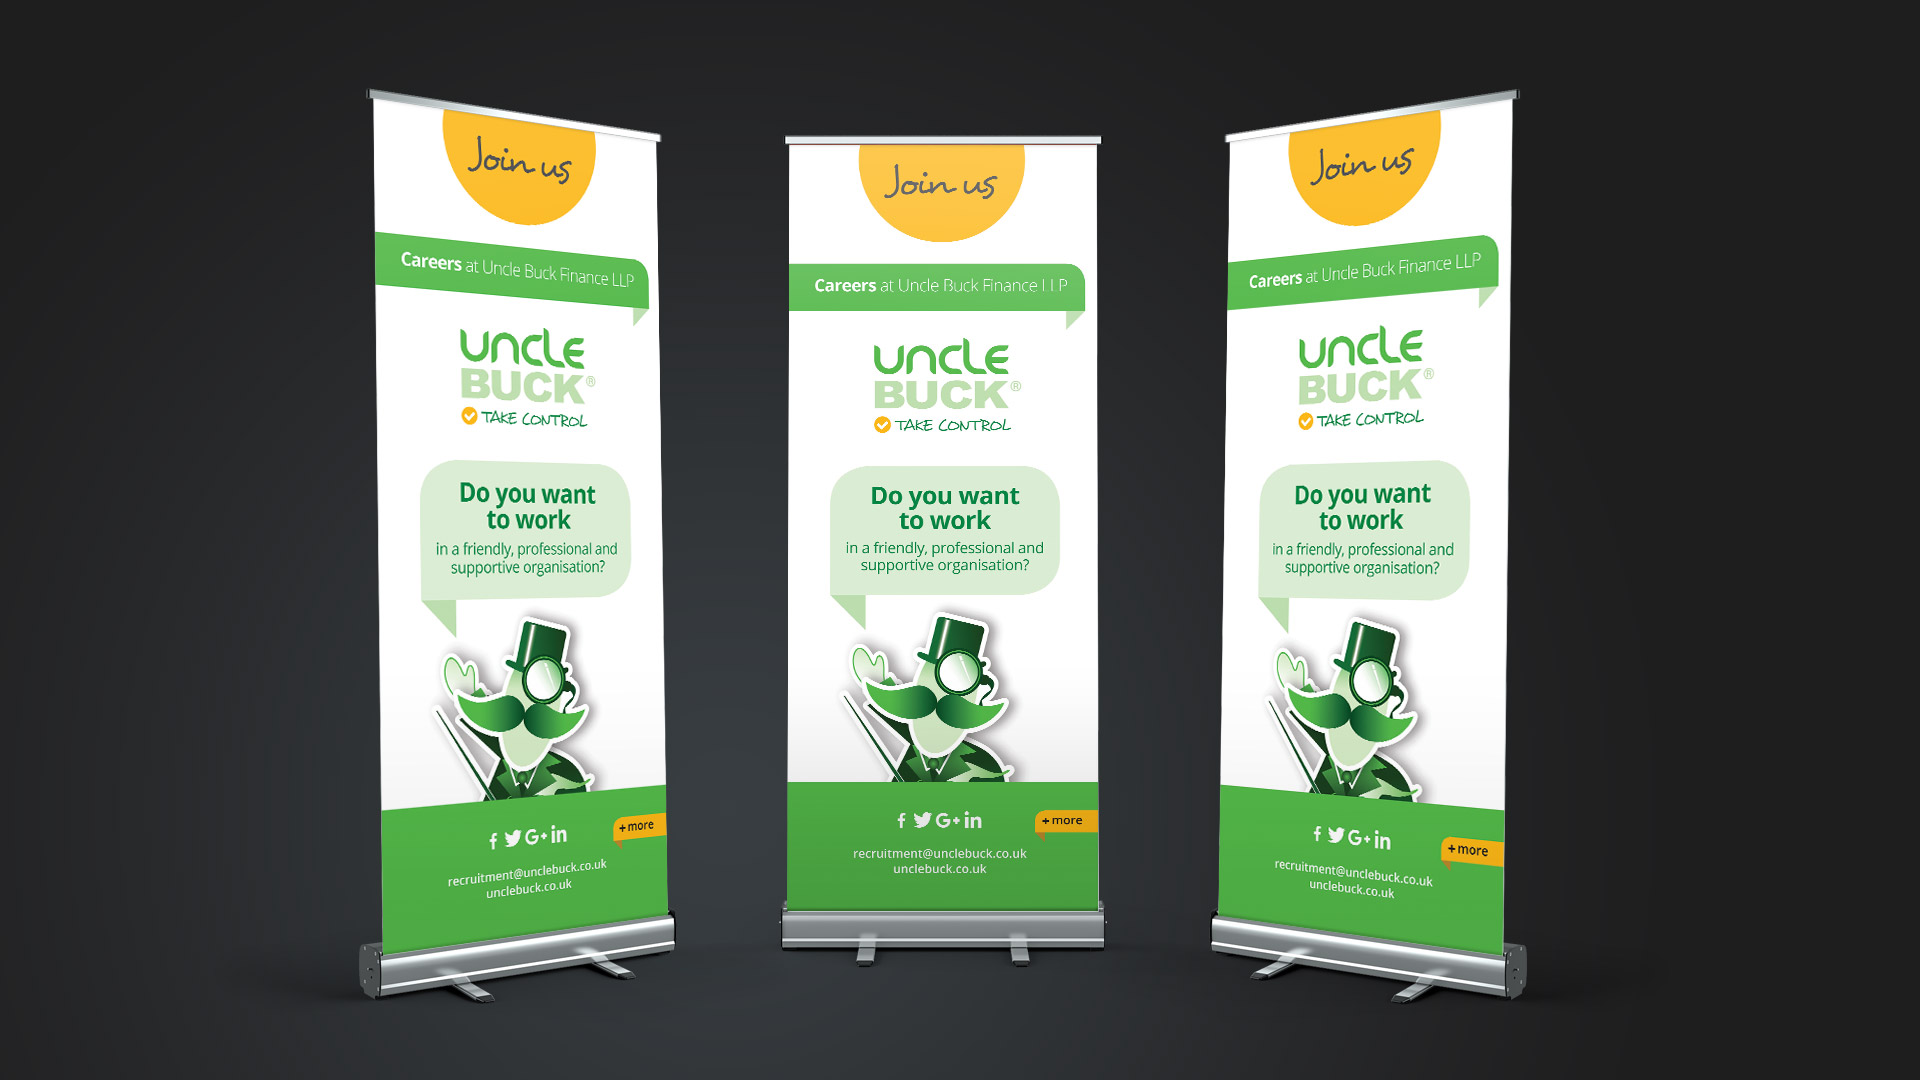 Roll up banner design and print